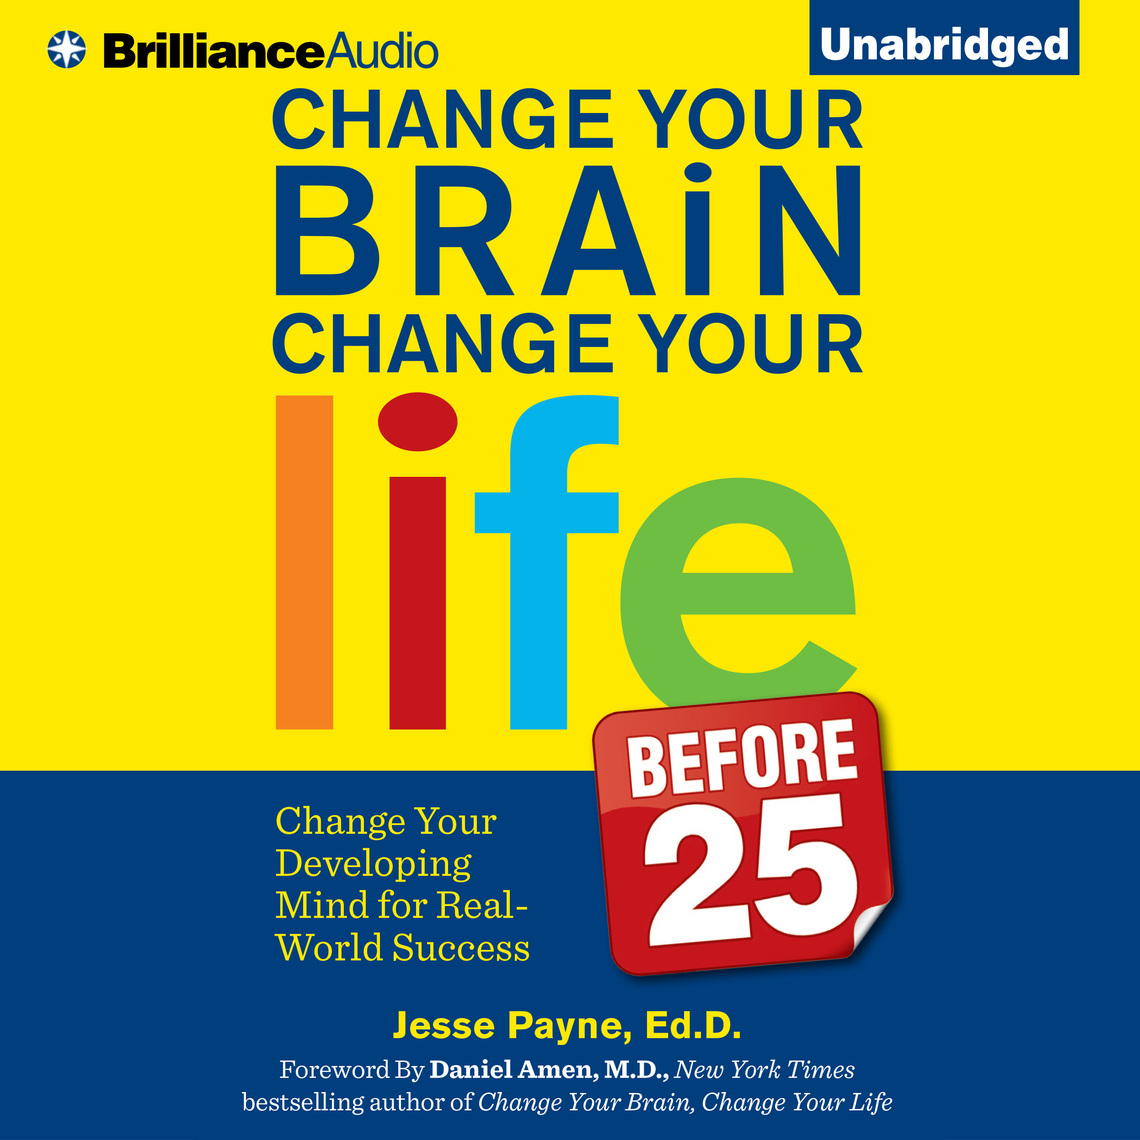 Change Your Brain, Change Your Life (Before 25) by Jesse Payne, Ed